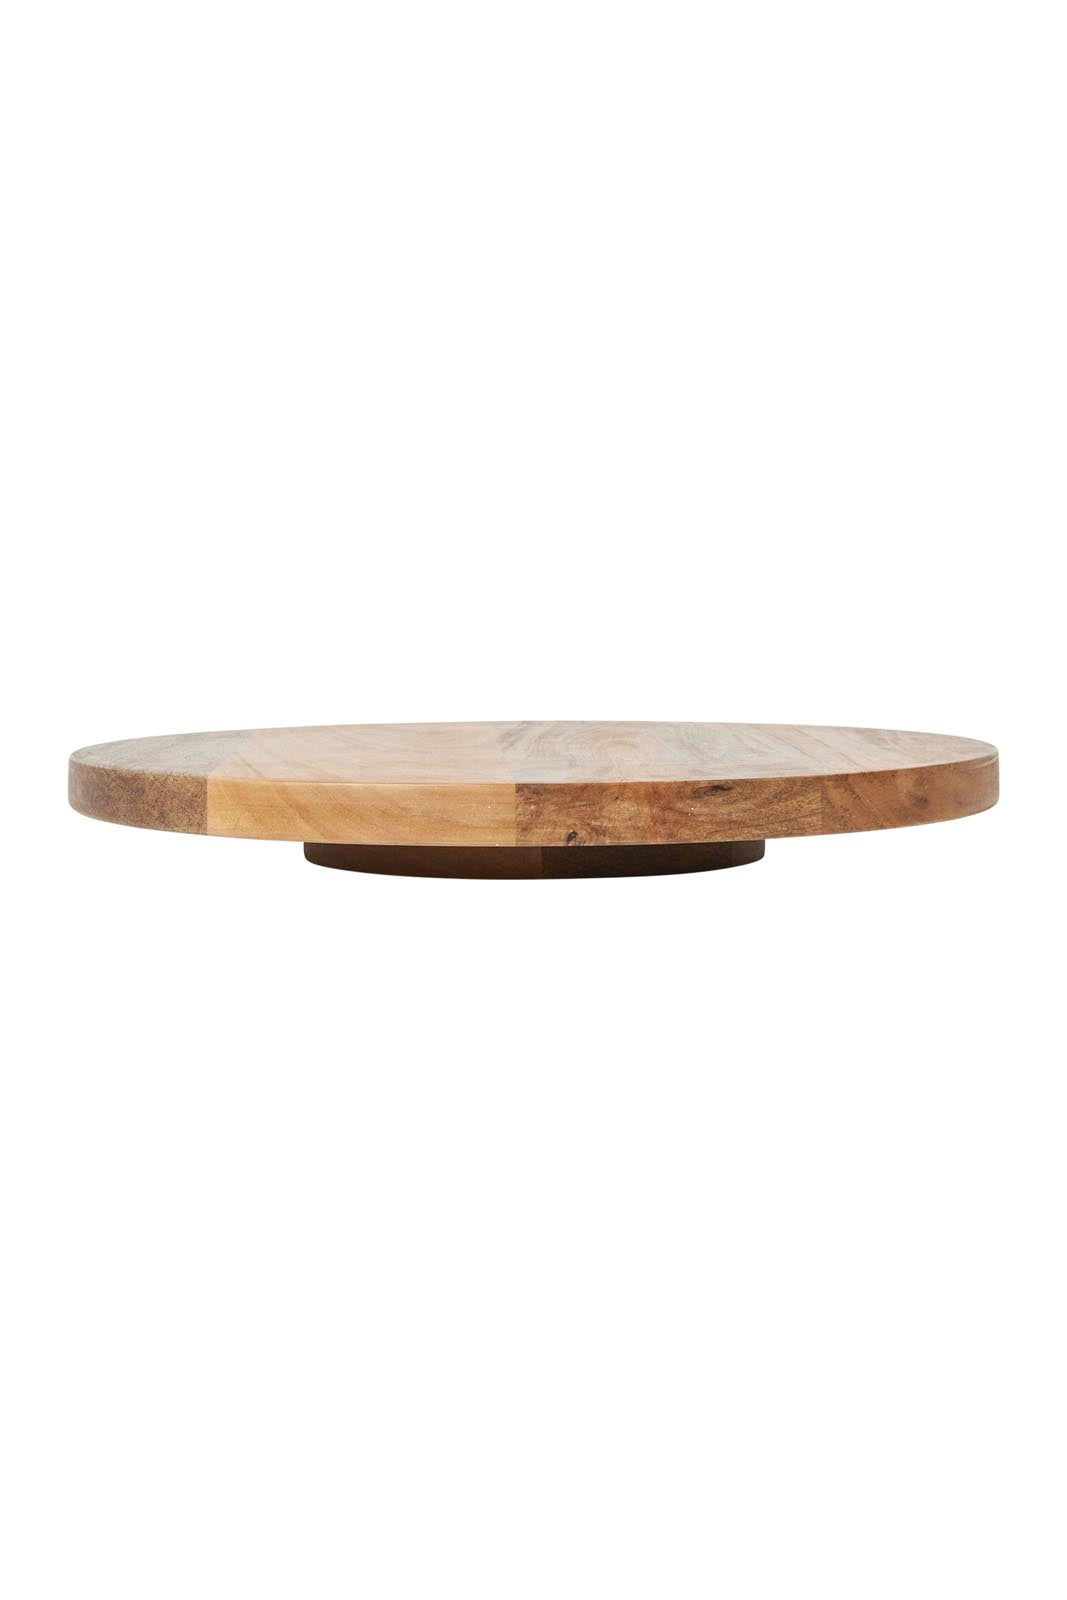 Raine Lazy Susan - Natural Wood - eb&ive Table Top